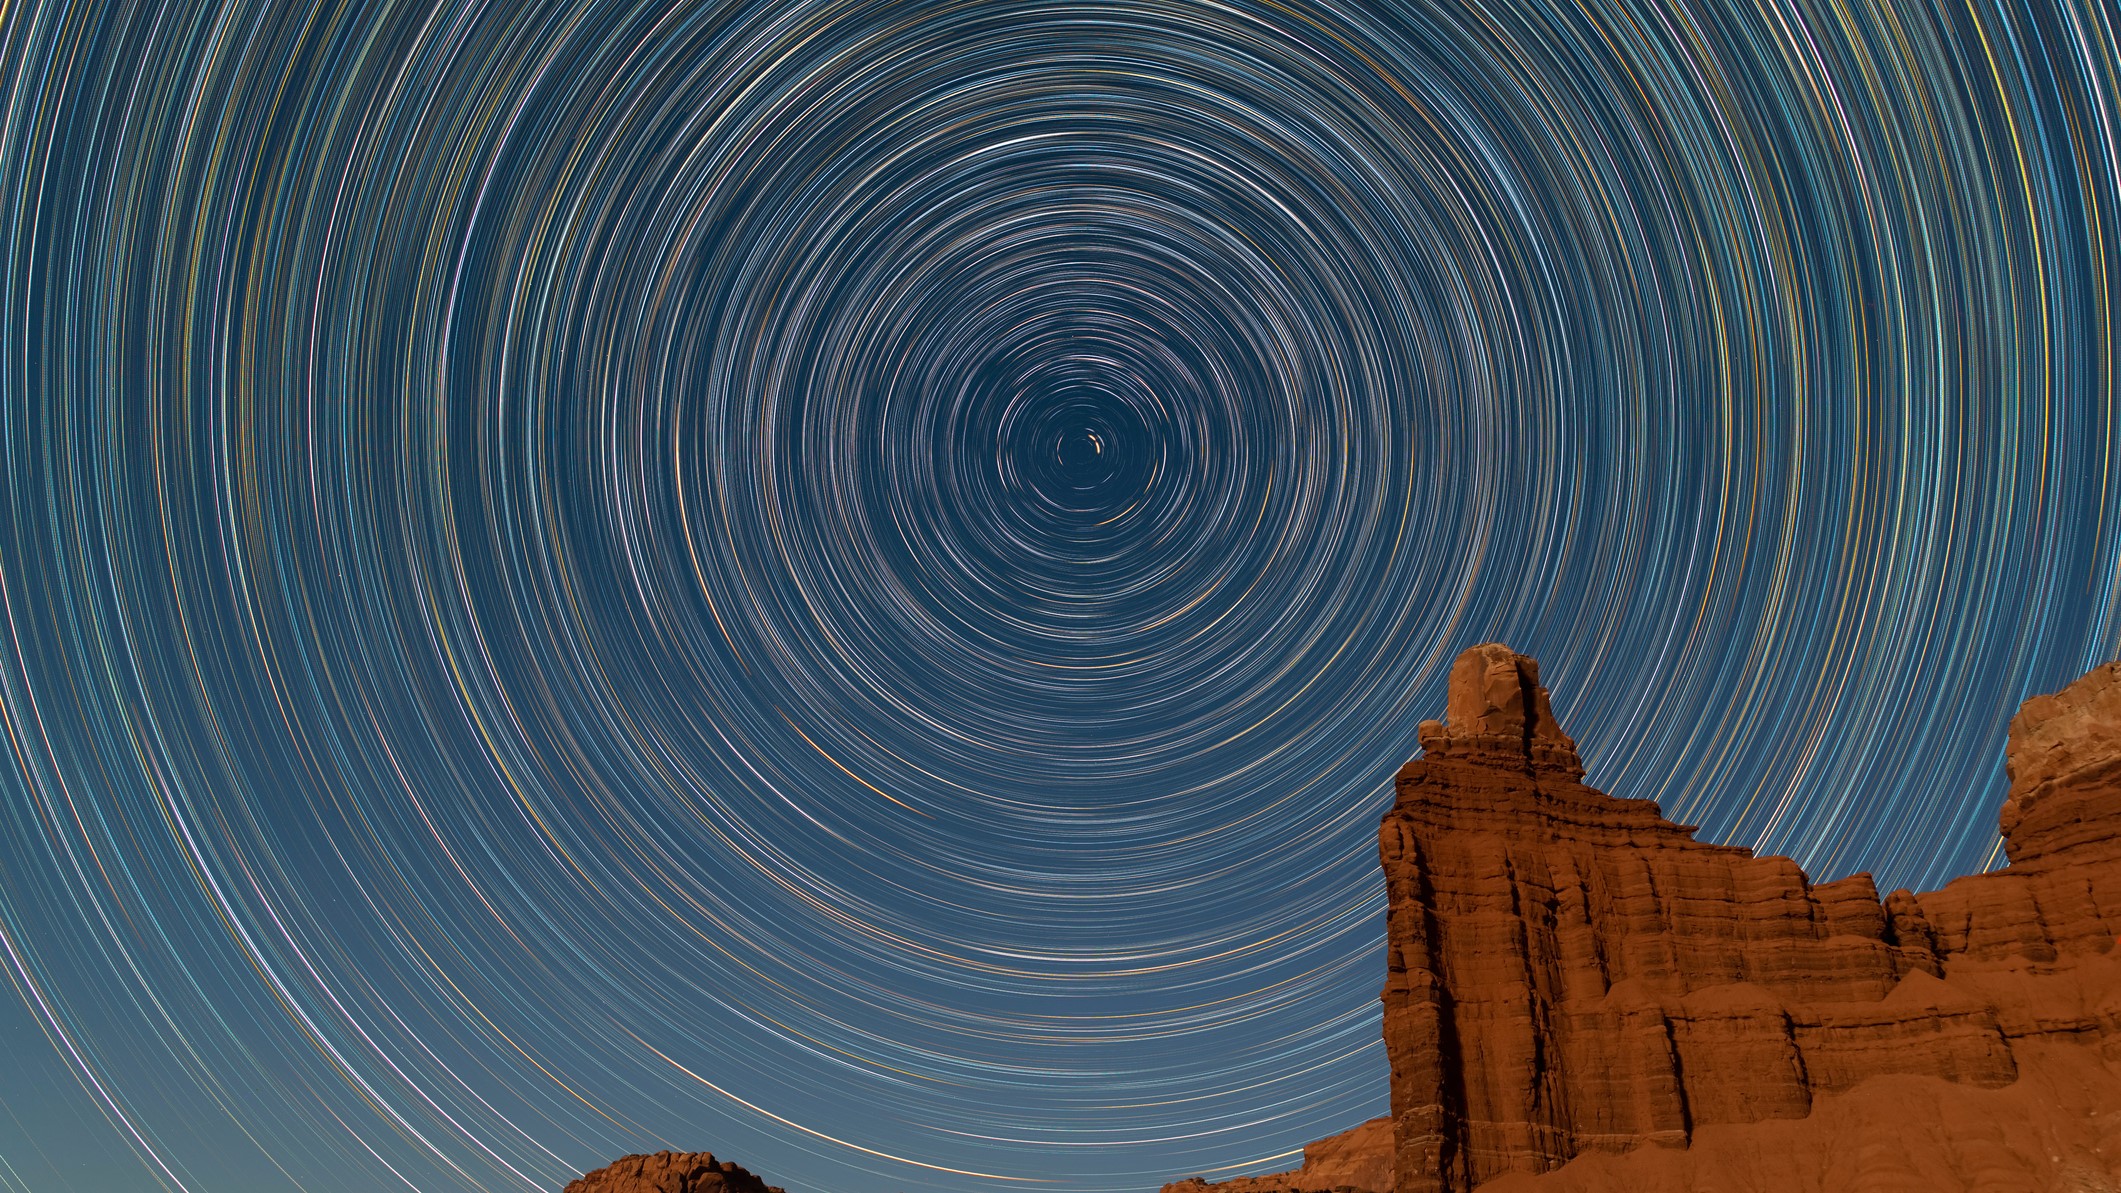 rock formation in lower right corner of the image with star trails above.